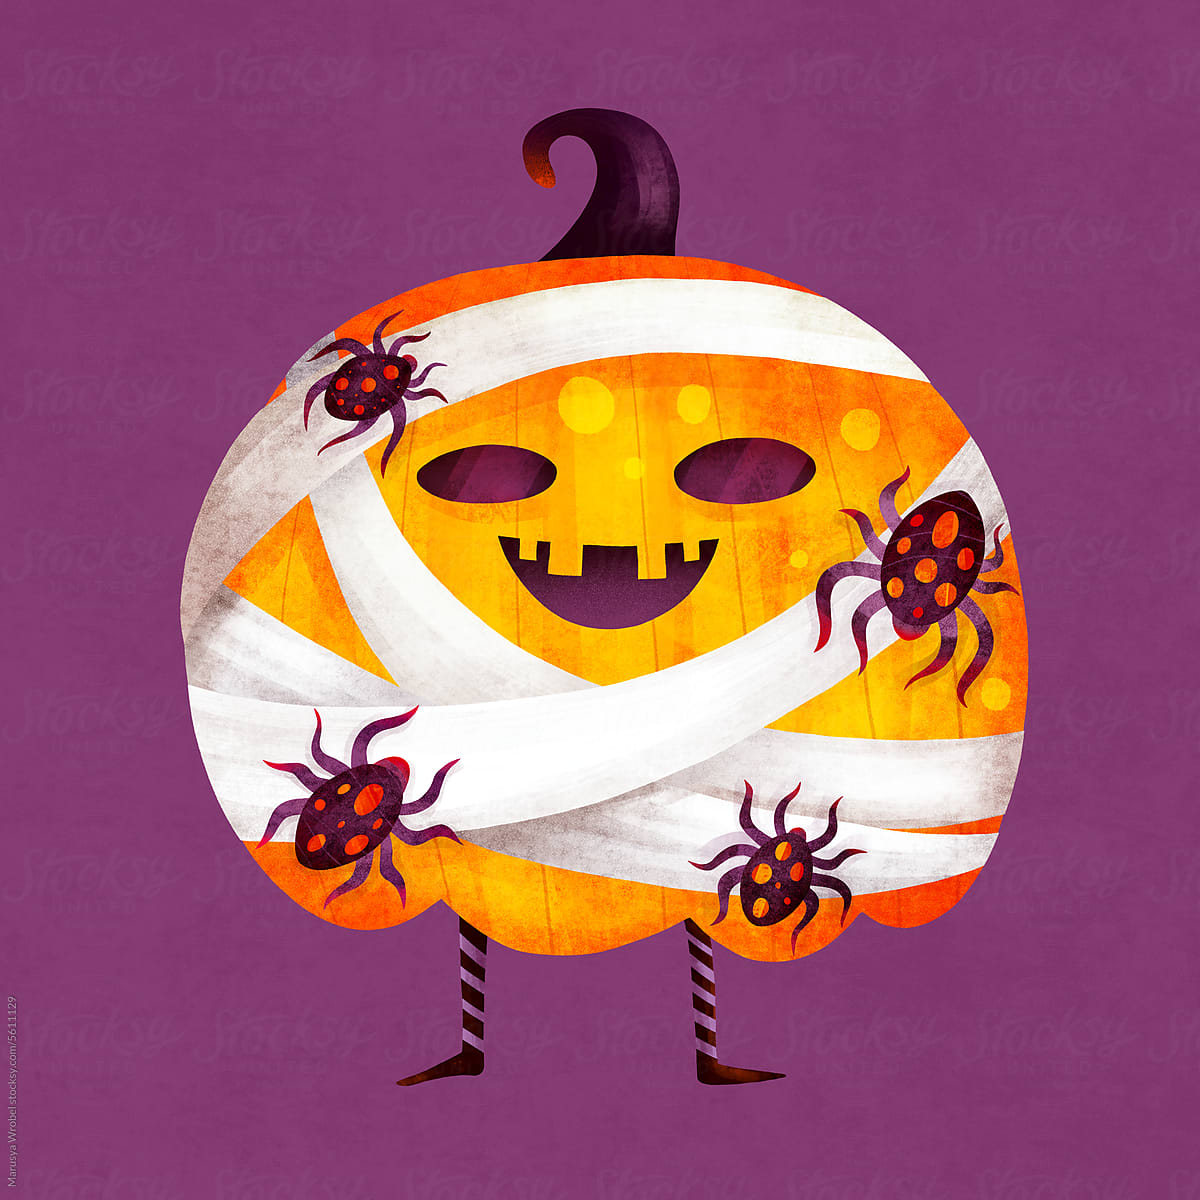 Halloween pumpkin character dressed as a mummy and with spiders